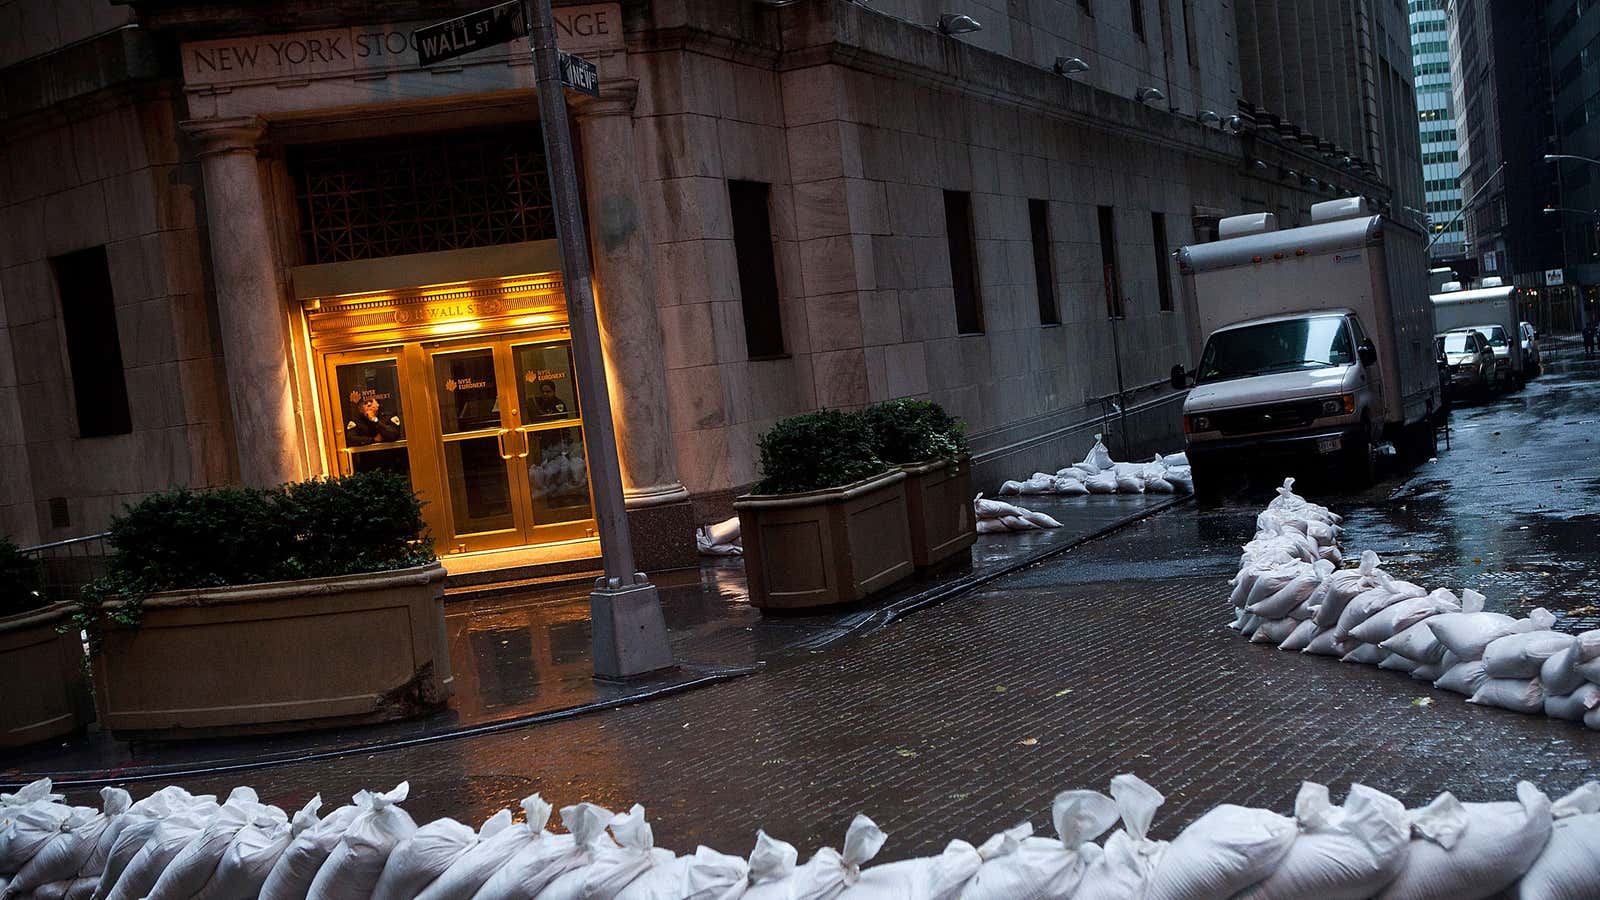 Sandbags were set up to protect an entrance of the New York Stock Exchange